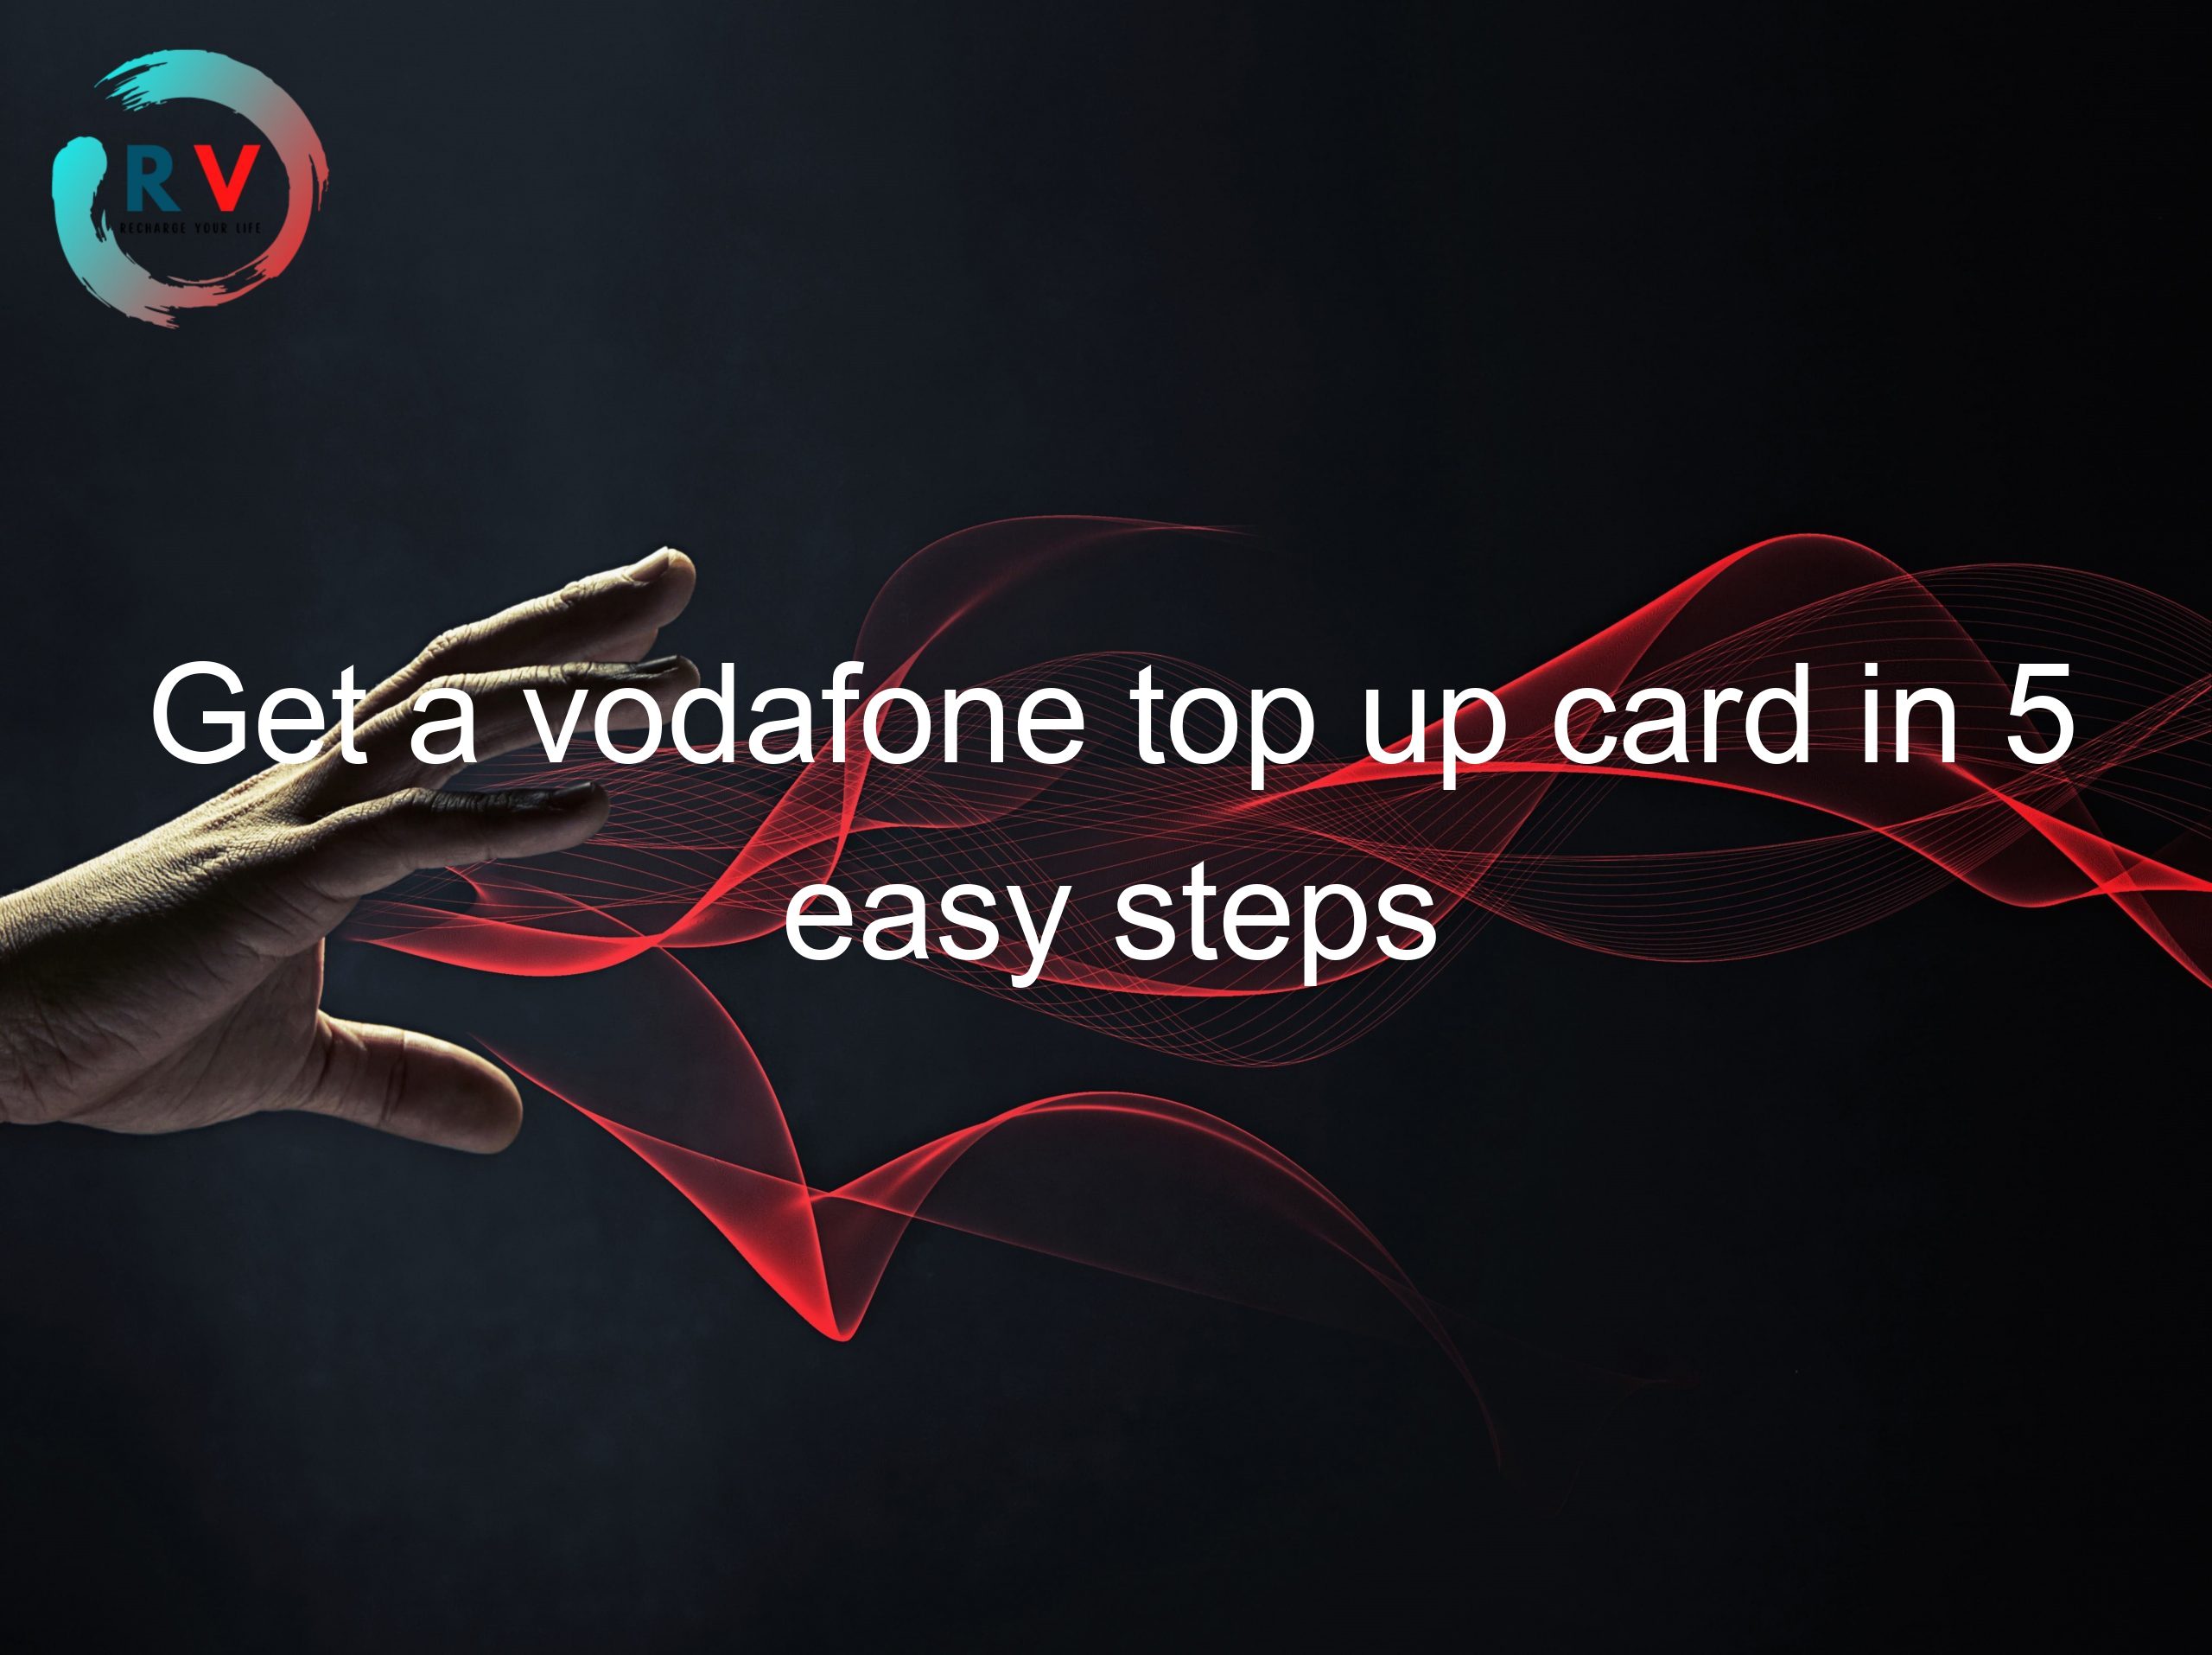 Get a vodafone top up card in 5 easy steps